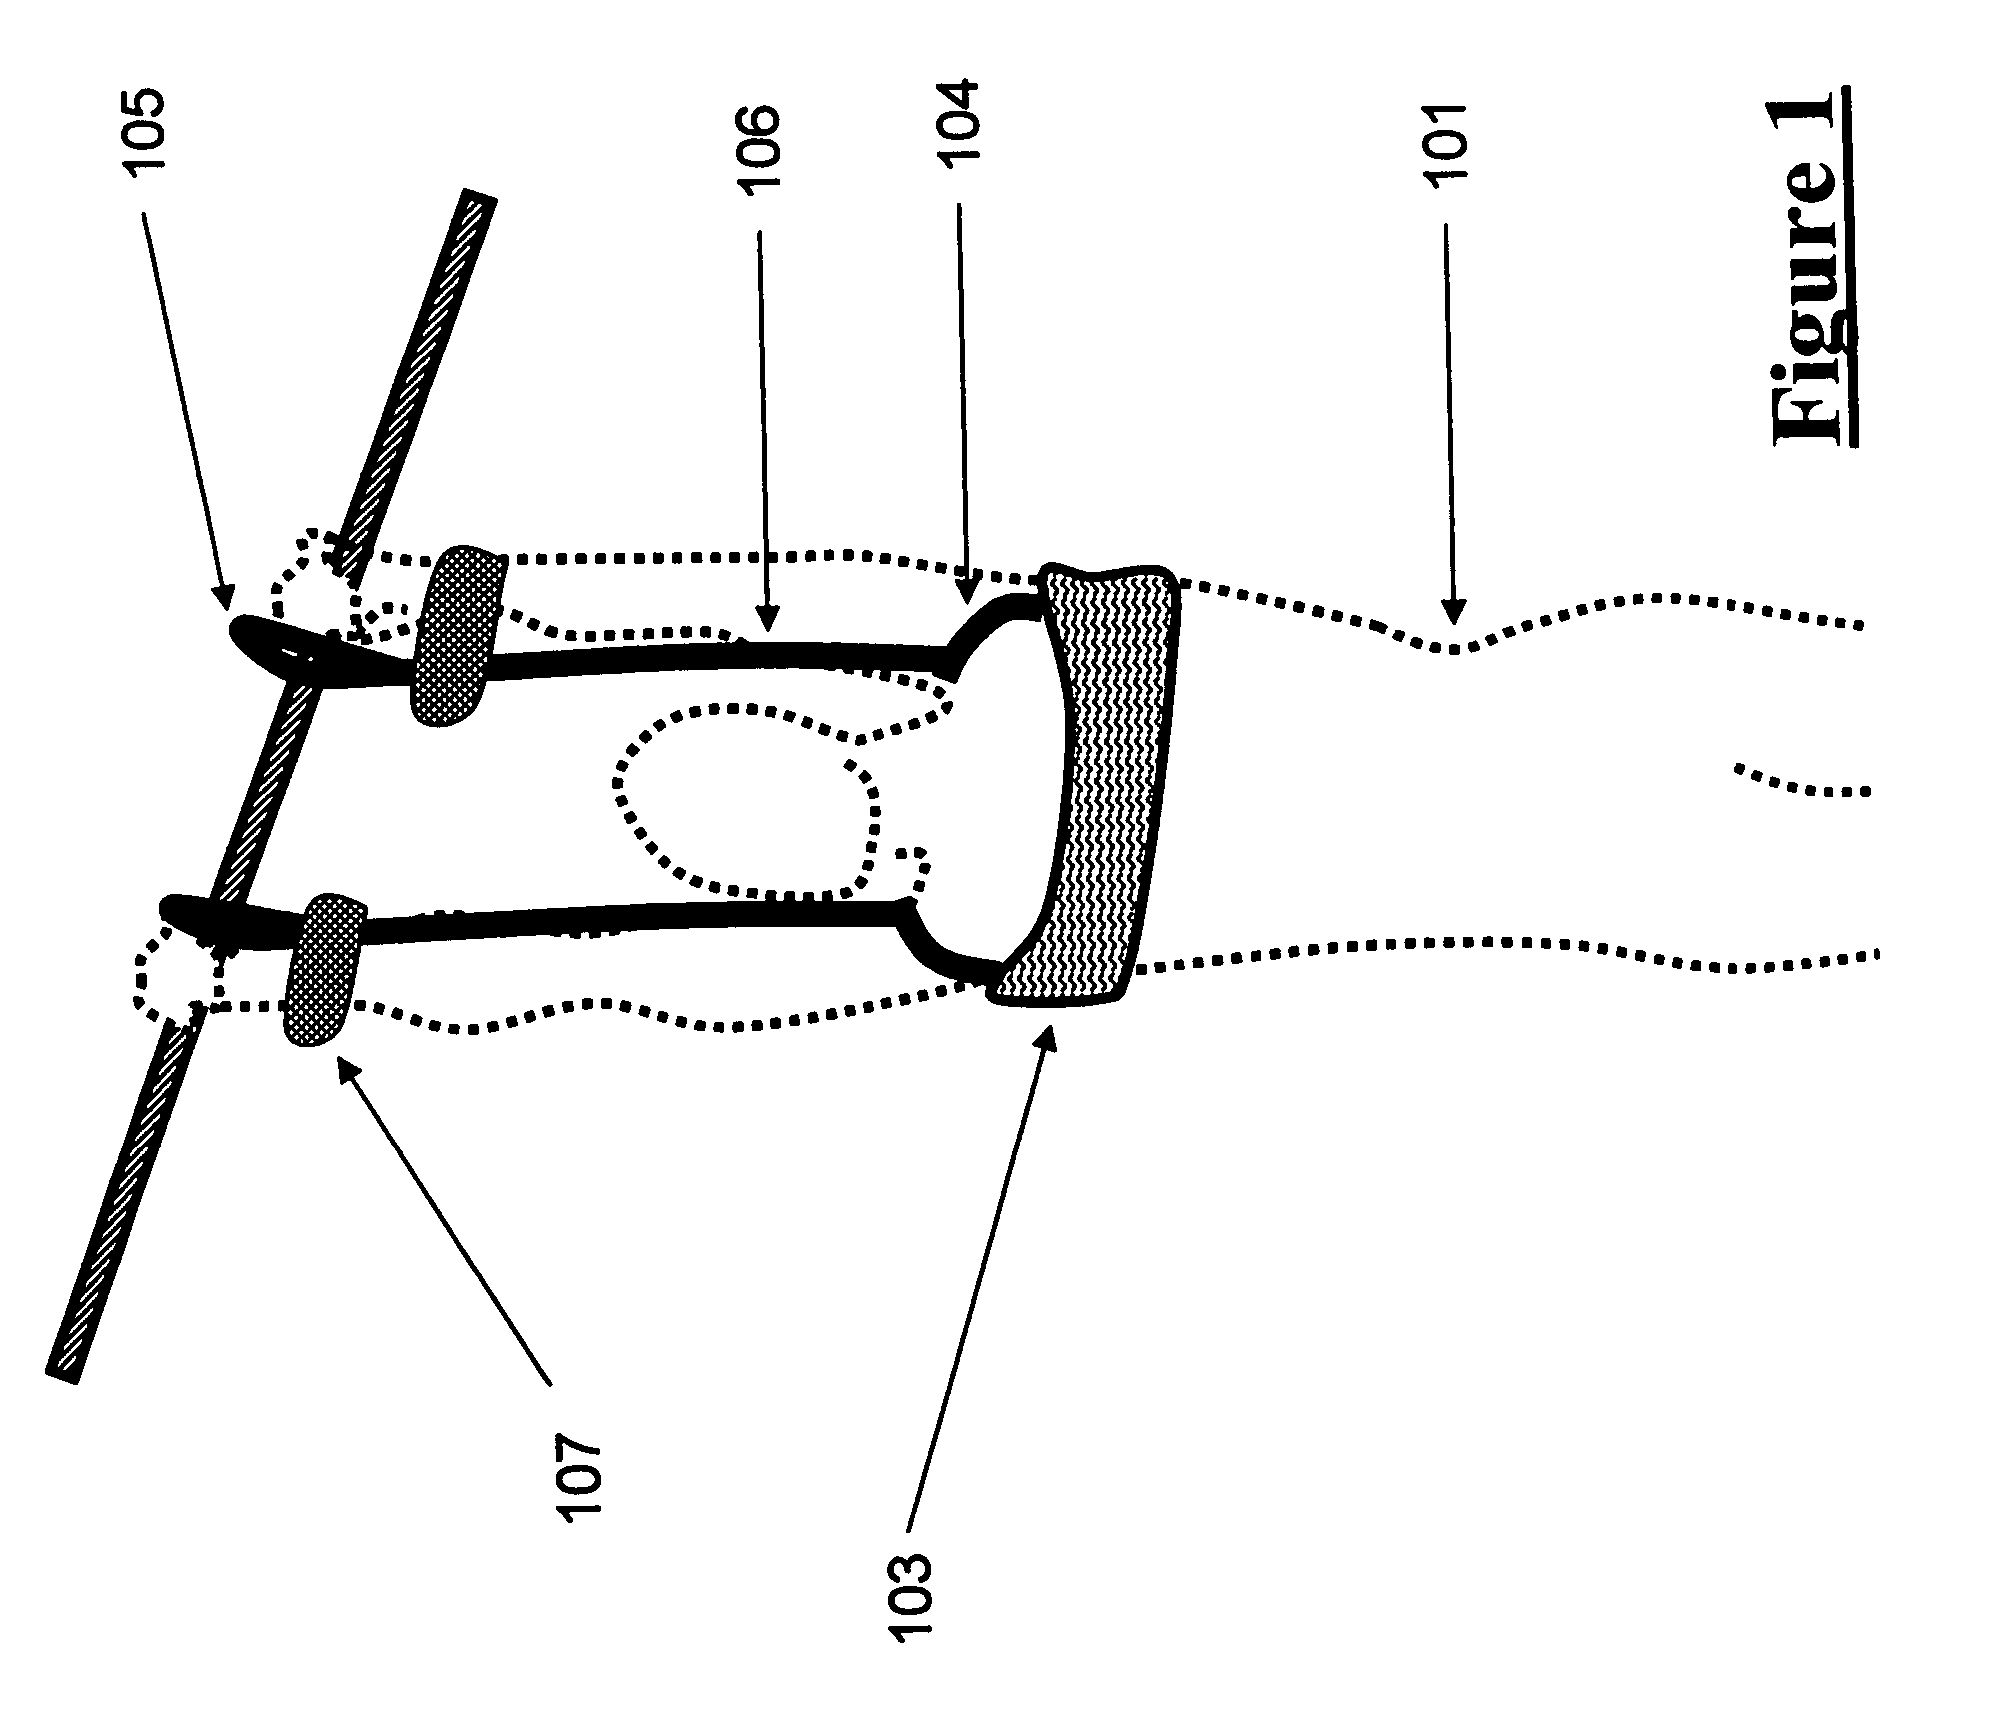 Gymnastics safety and training aid harness for high bar and other apparatus